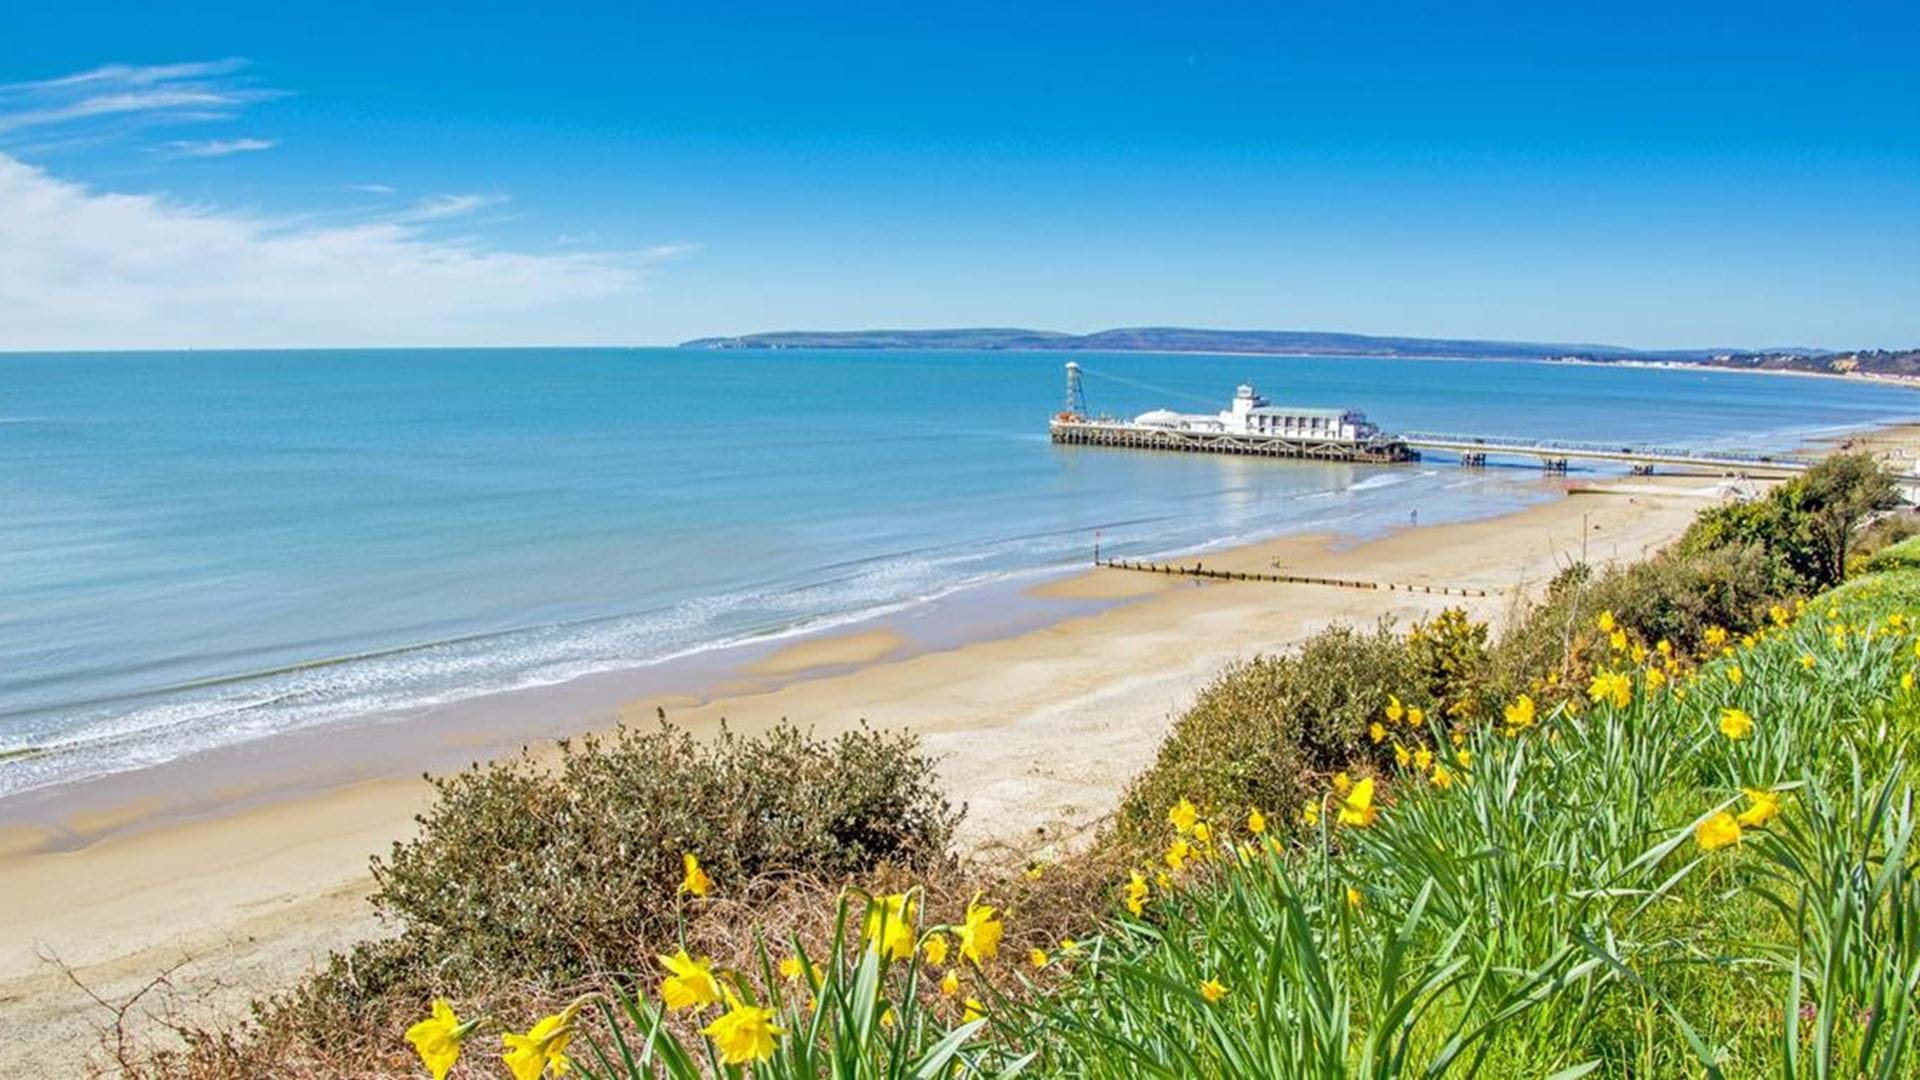 views-of-the-pier-and-bournemouth-beach-in-dorset